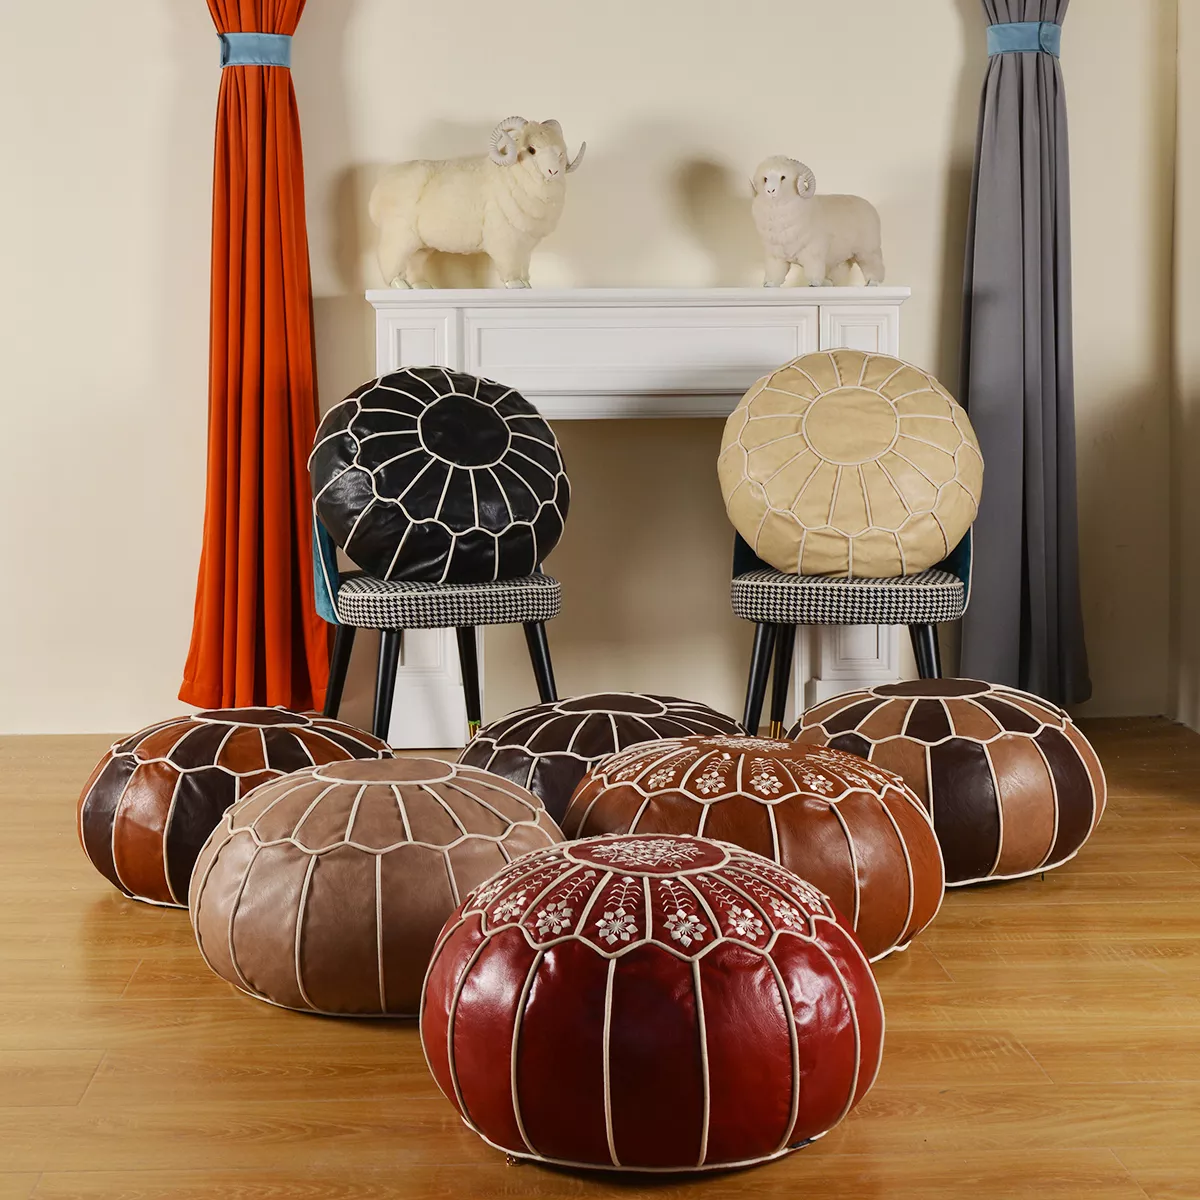 10 Tips for Decorating with Footstools